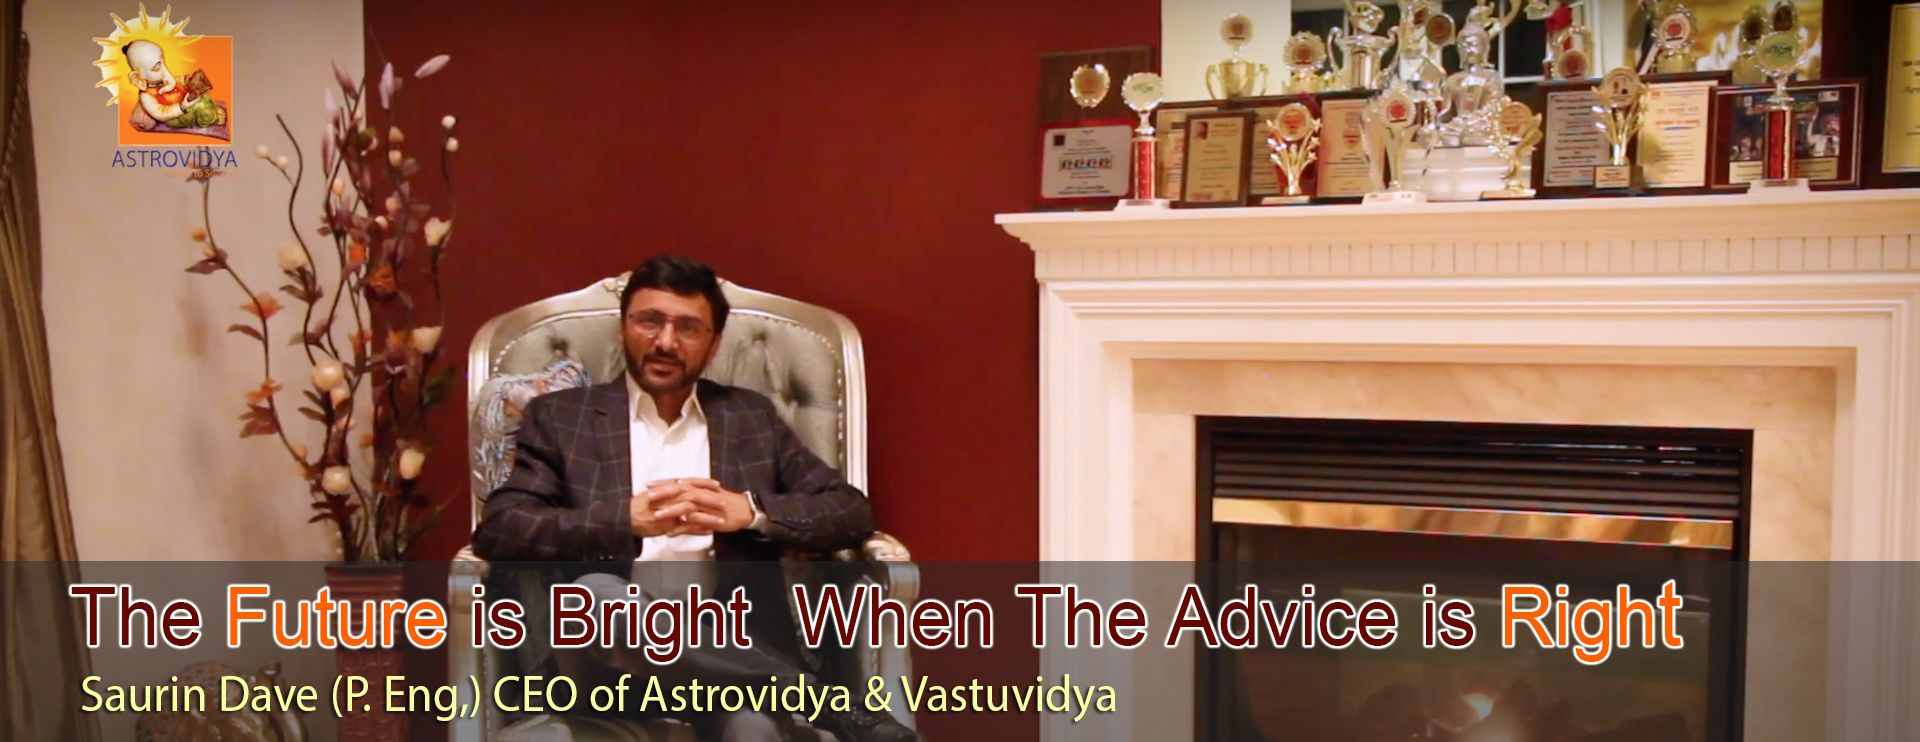 Vastu services for home, office, business, commercial, industrial unit by Vastuvidya